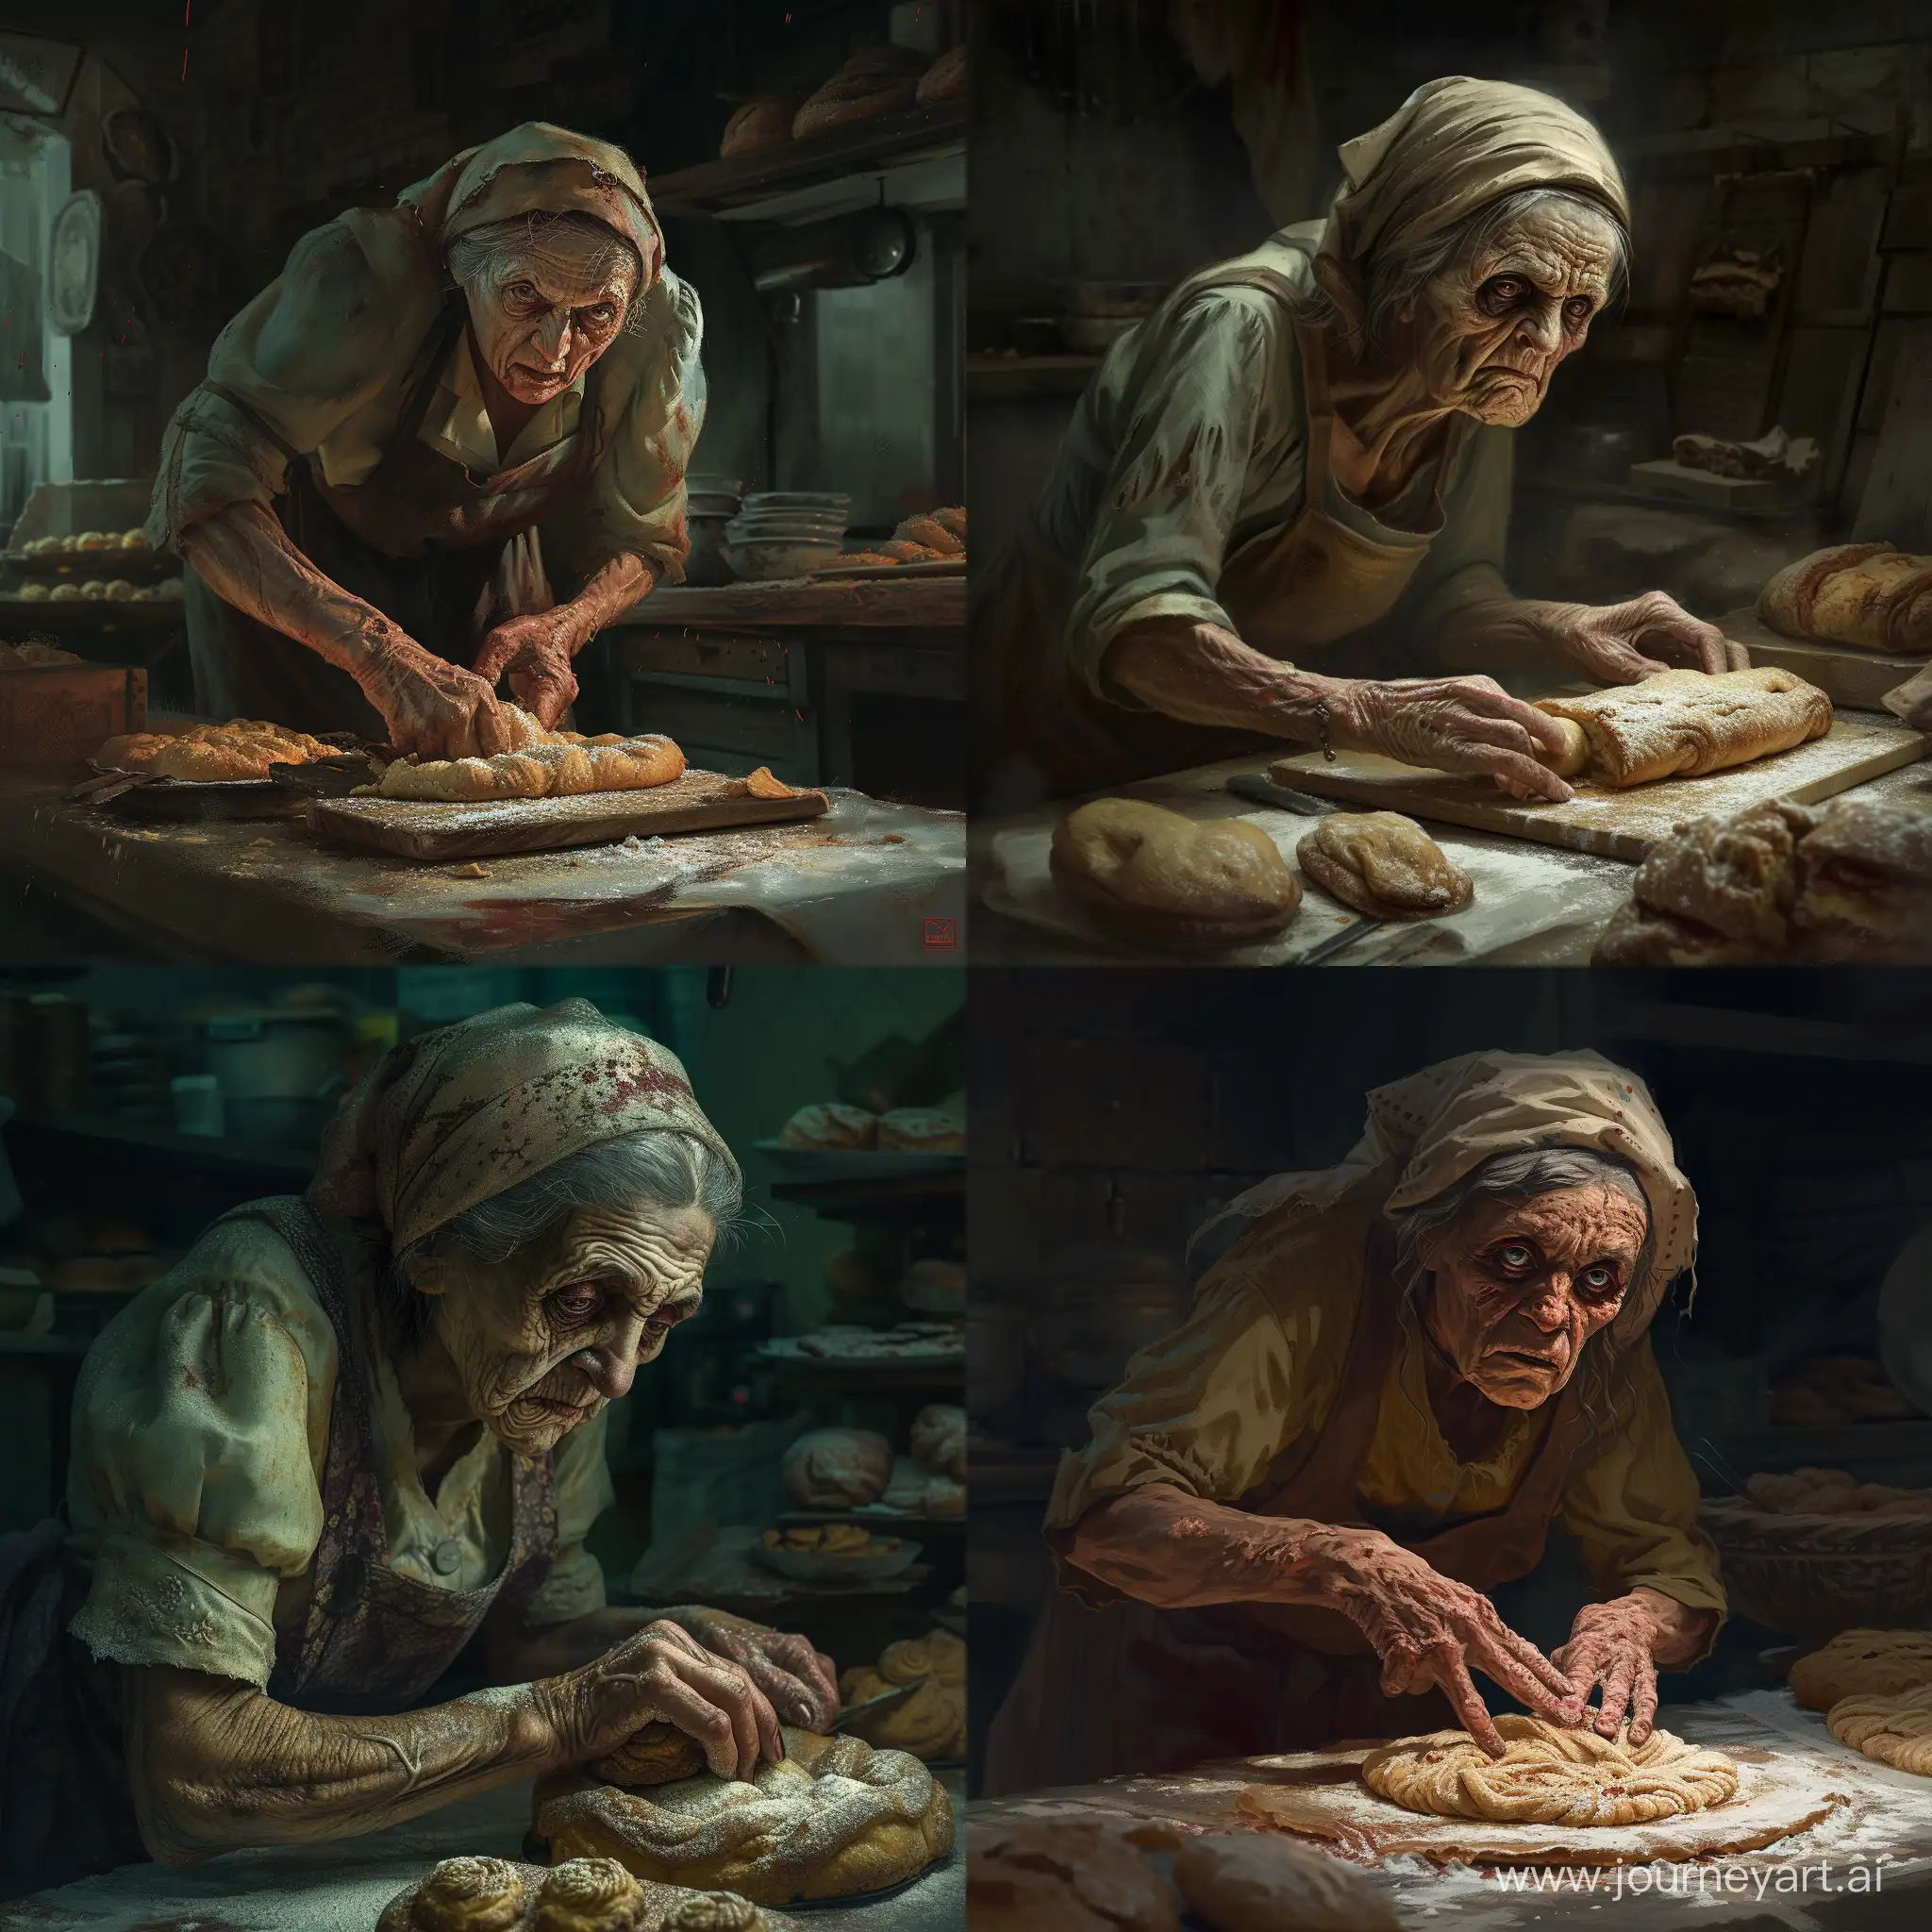 Weathered-Baker-Crafting-Hopeful-Pastries-in-Gritty-1970s-Fantasy-Bakery